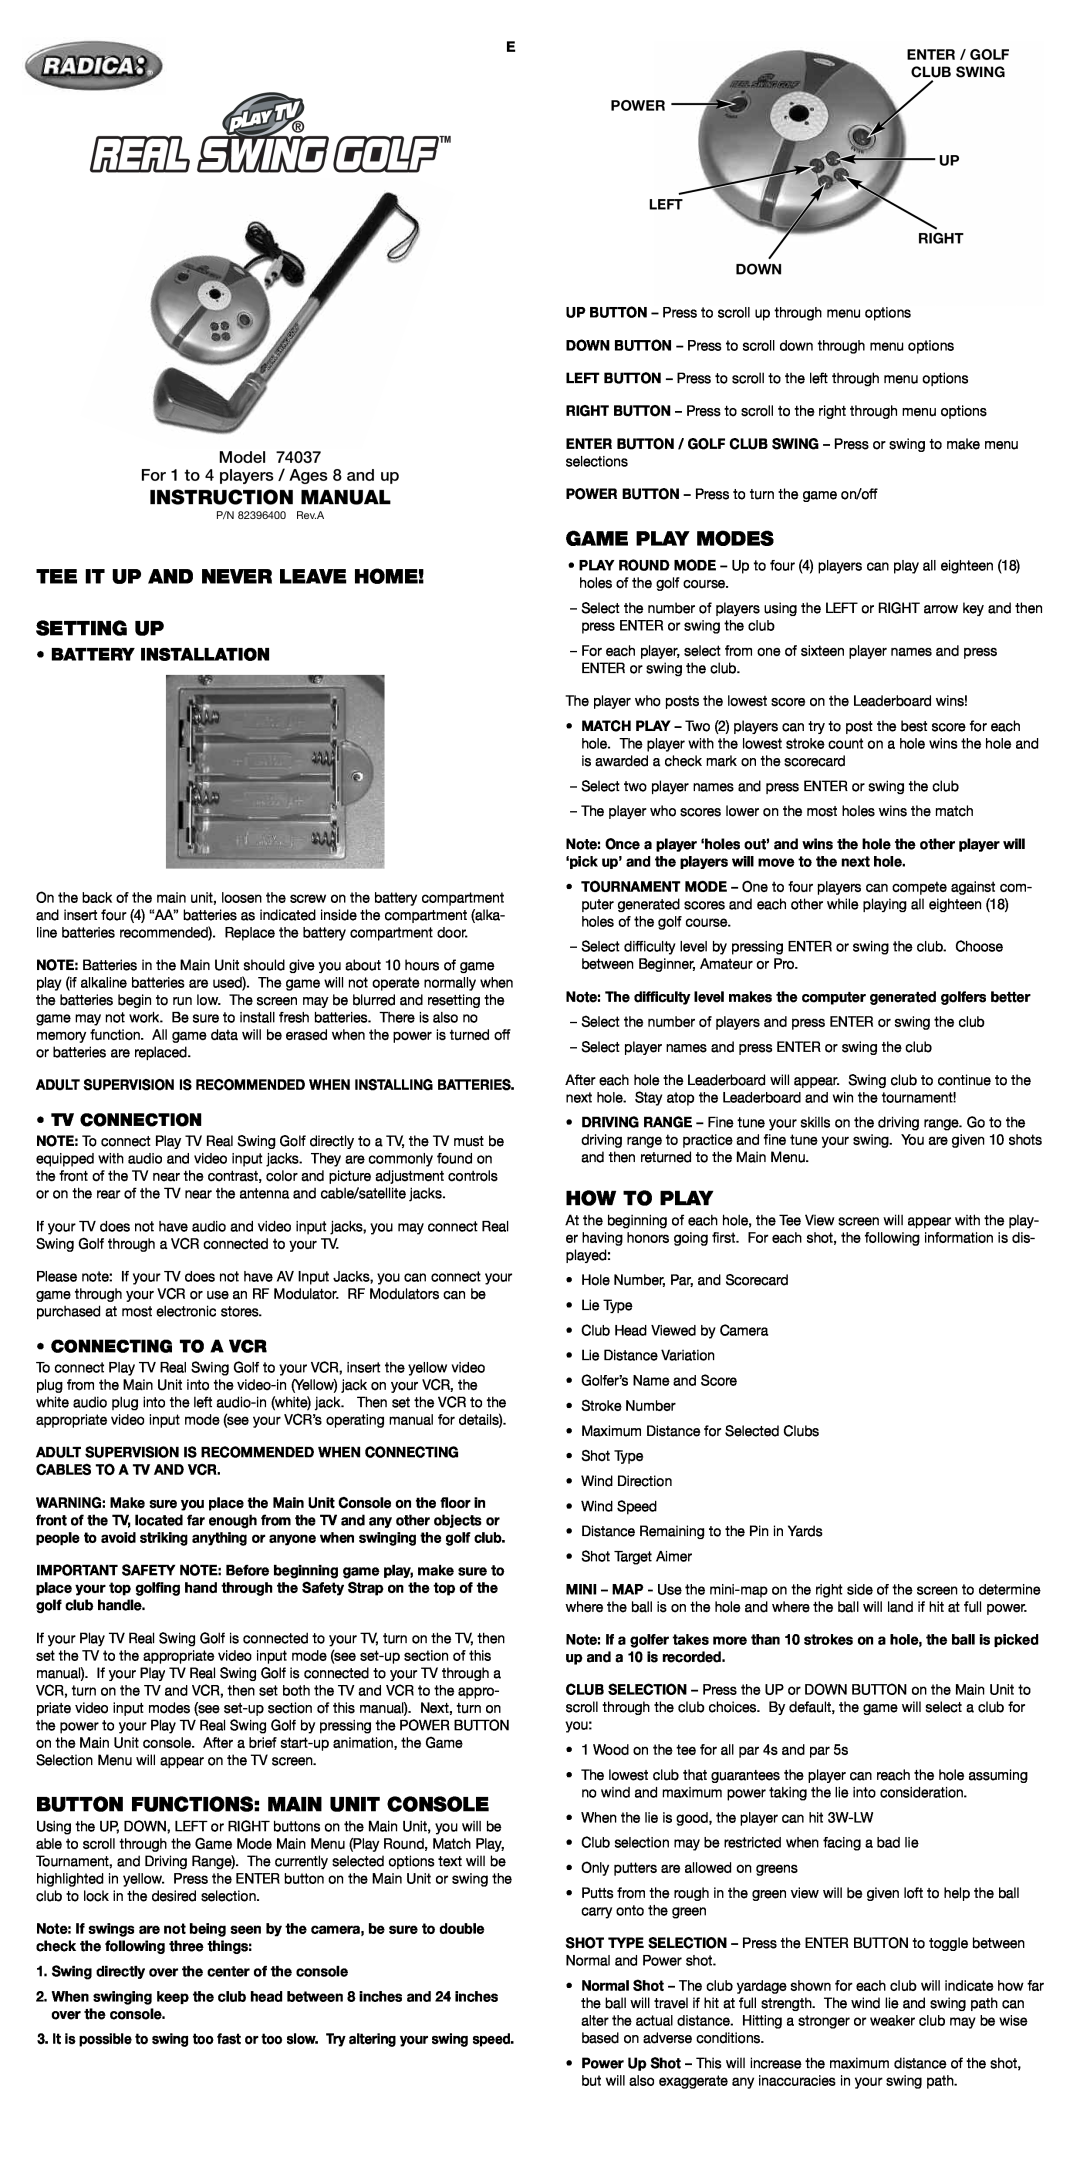 Radica Games 74037 instruction manual Instruction Manual, Tee It Up And Never Leave Home Setting Up, Game Play Modes 